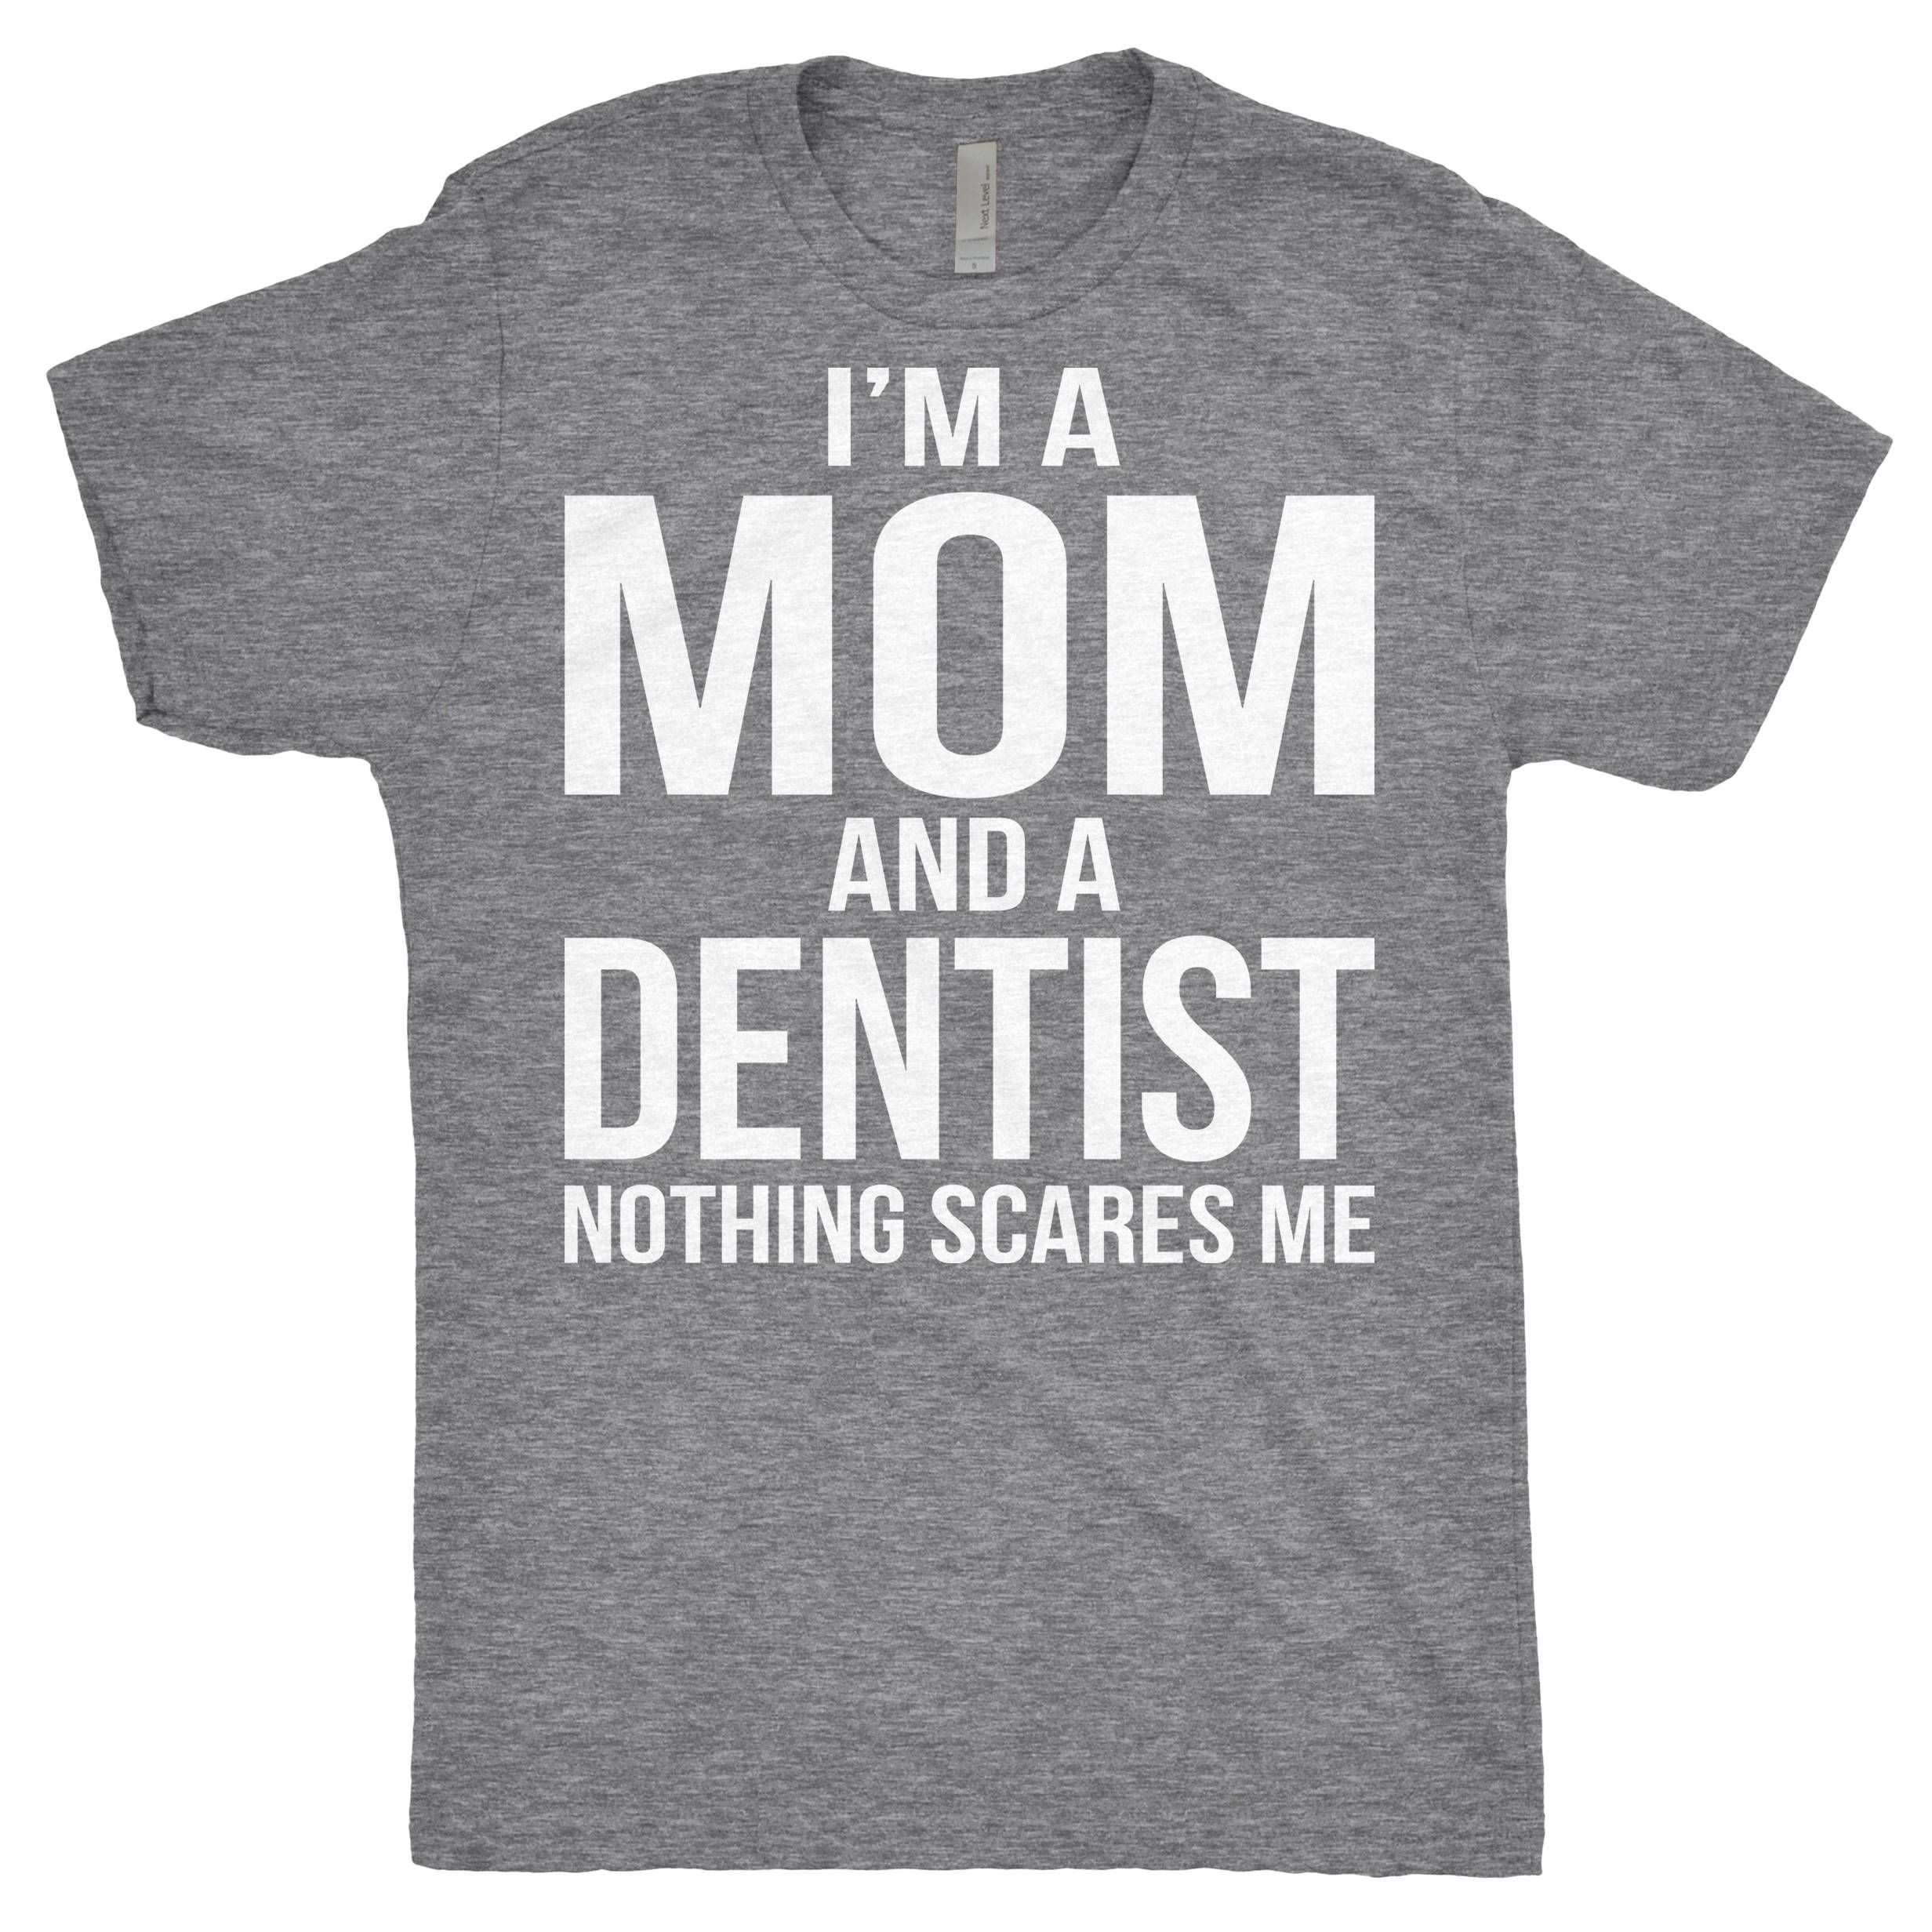 Dental School Graduation Gift Ideas
 Mom And A Dentist Gift Gift For Mother Funny Dentist